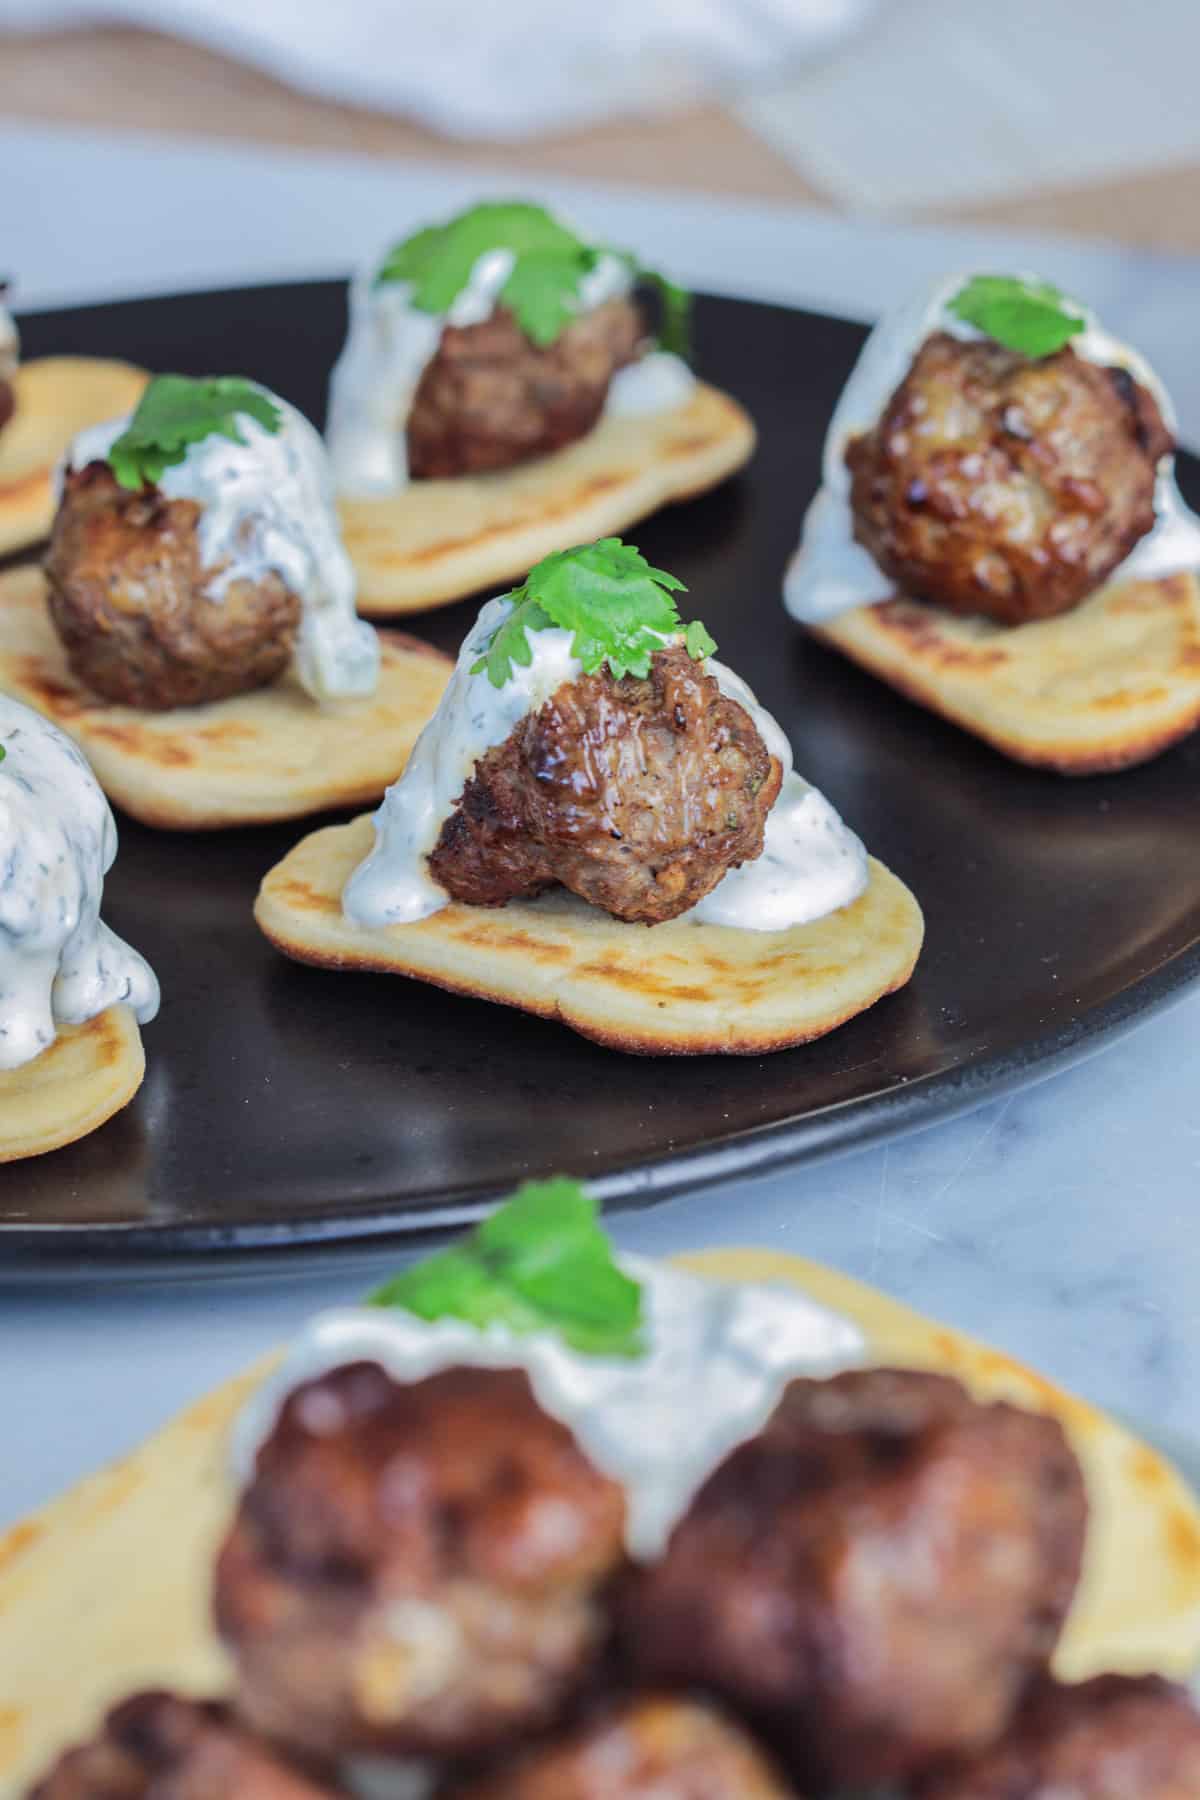 Lamb meatballs over pita bread on black plate with sauce.